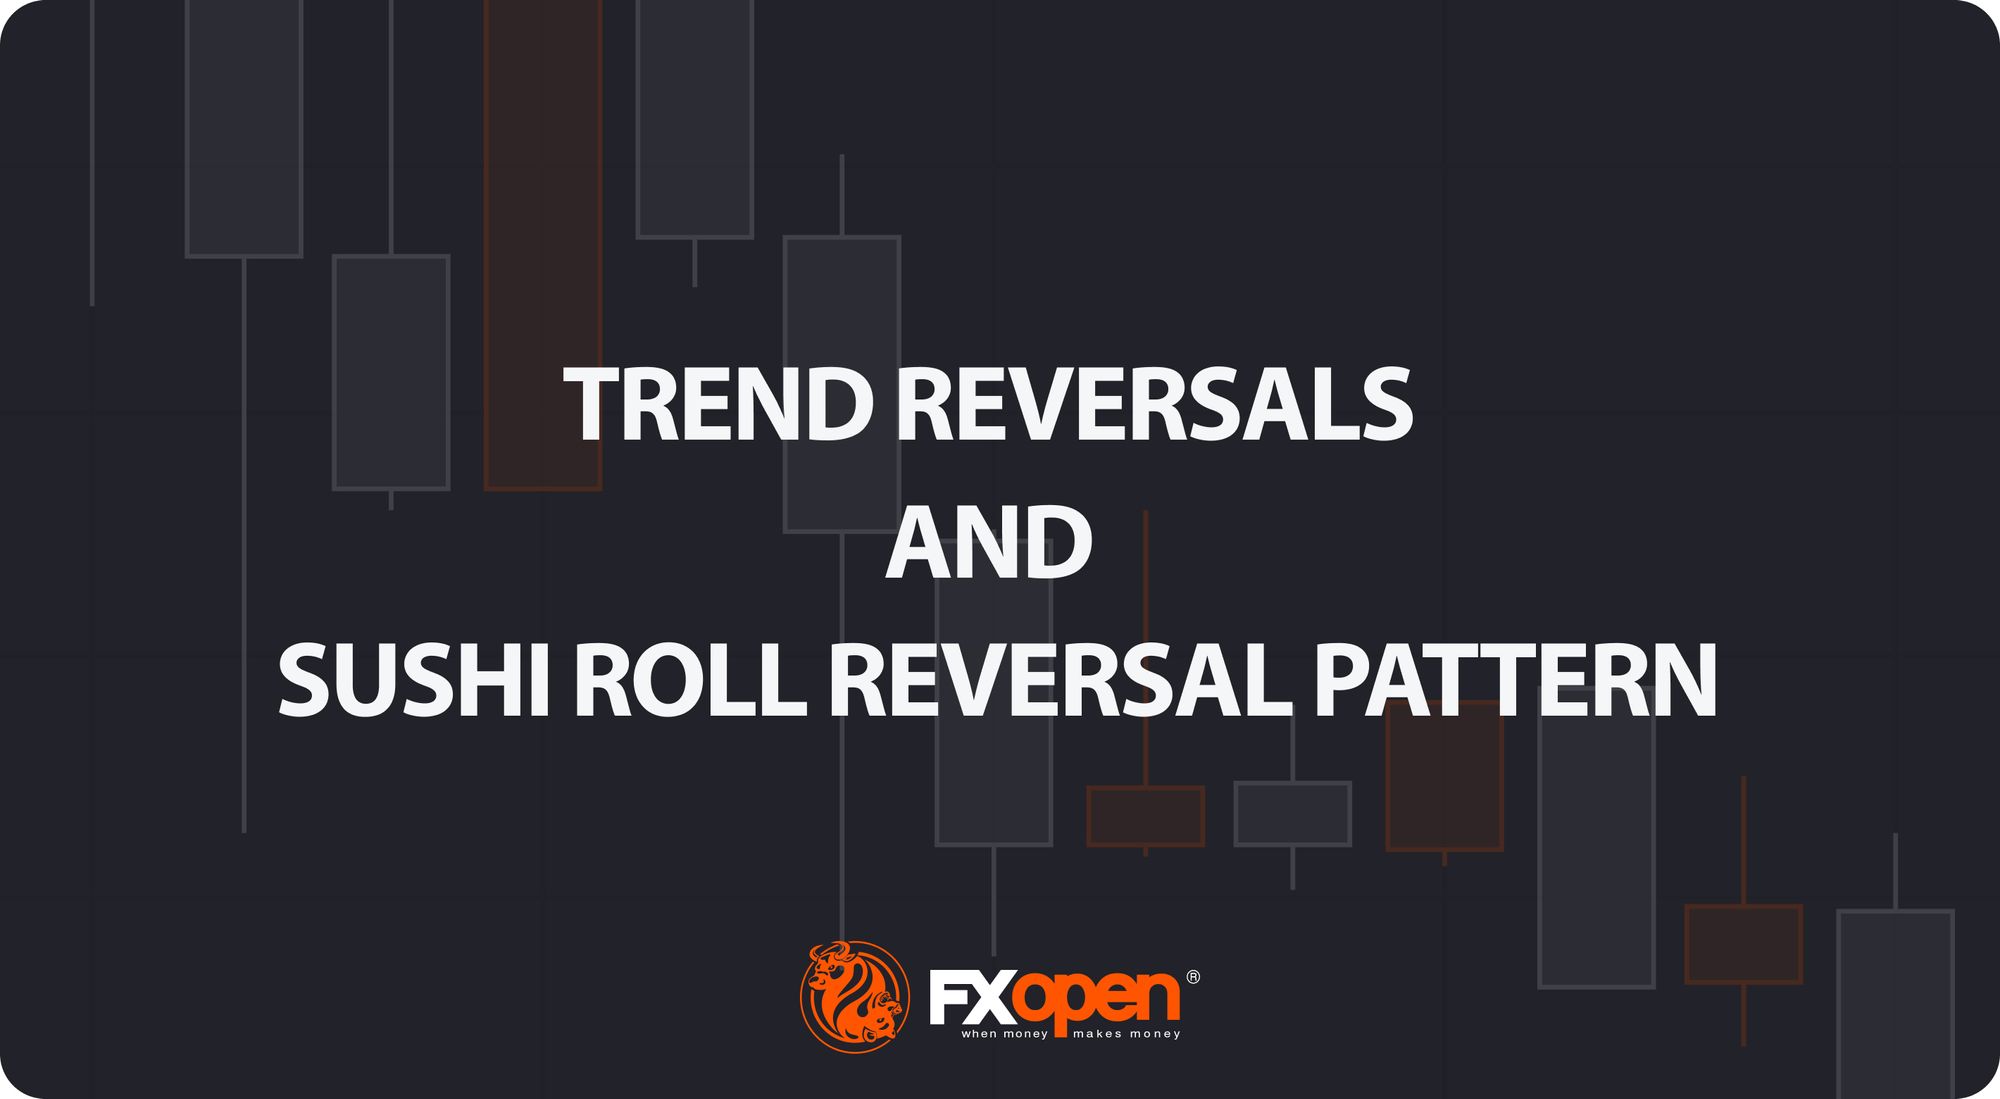 Trend Reversals and the Sushi Roll Reversal Pattern